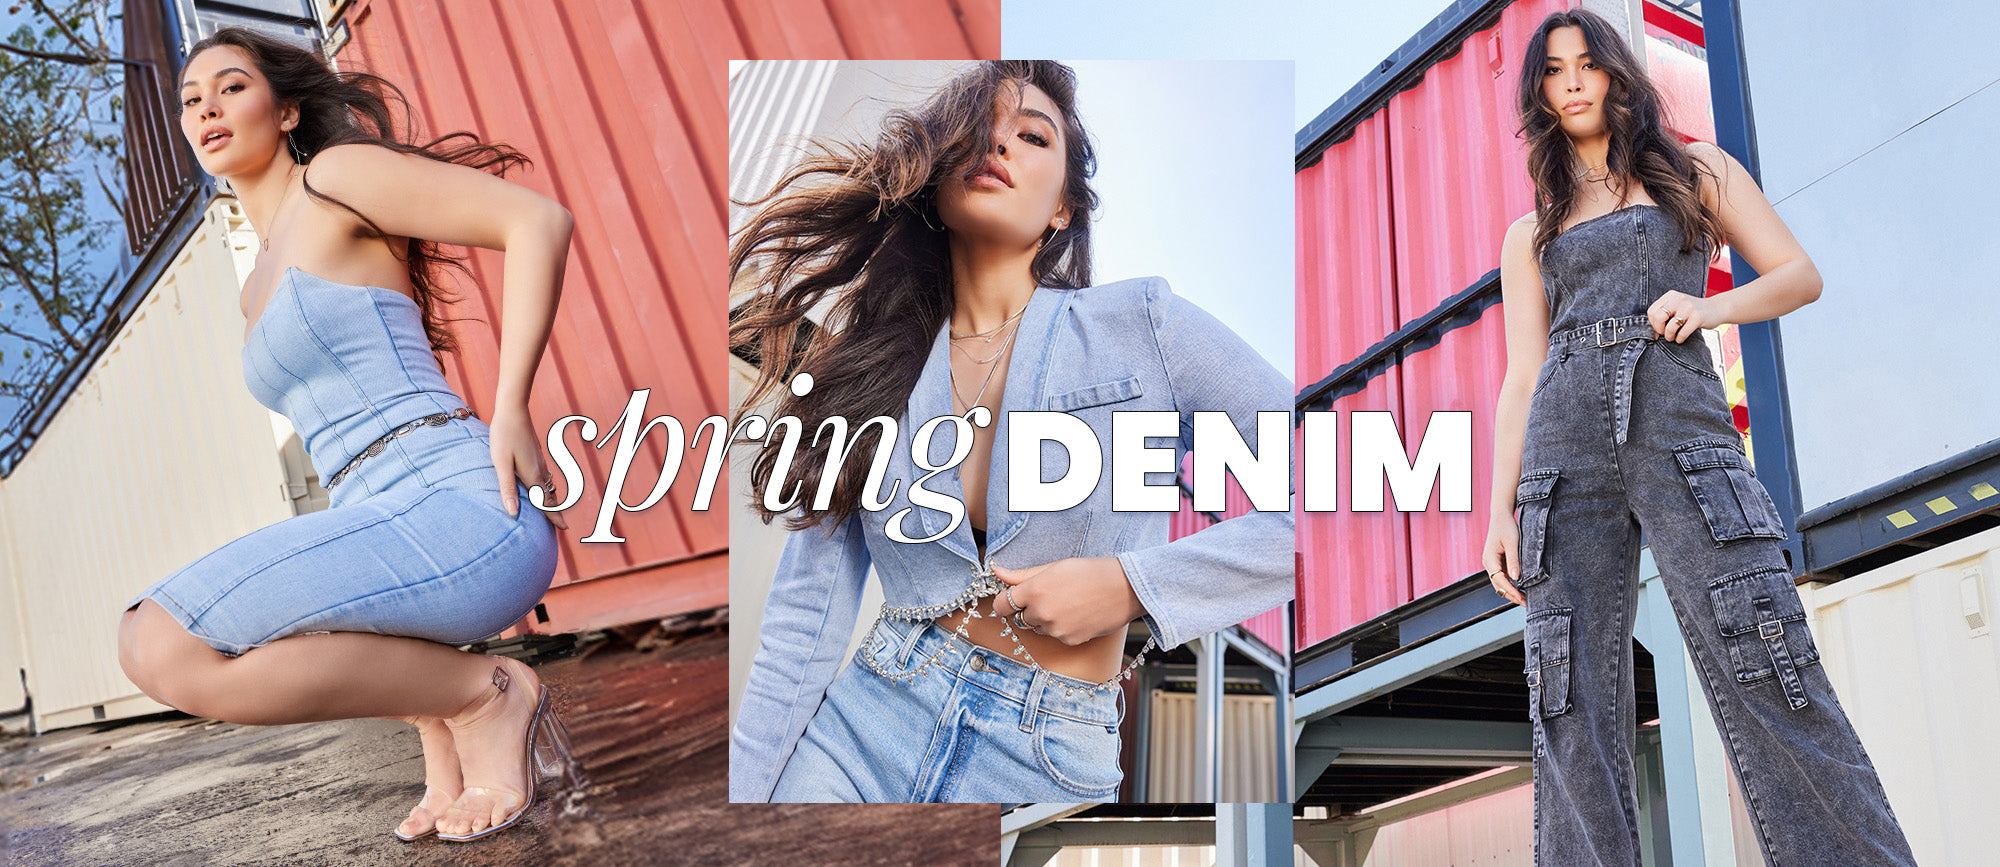 Shop new clothing and fashion arrivals including denim outfits for spring, women's jeans, jean jackets with new accents, & denim dresses, denim jumpsuits or rompers to nail your spring looks!